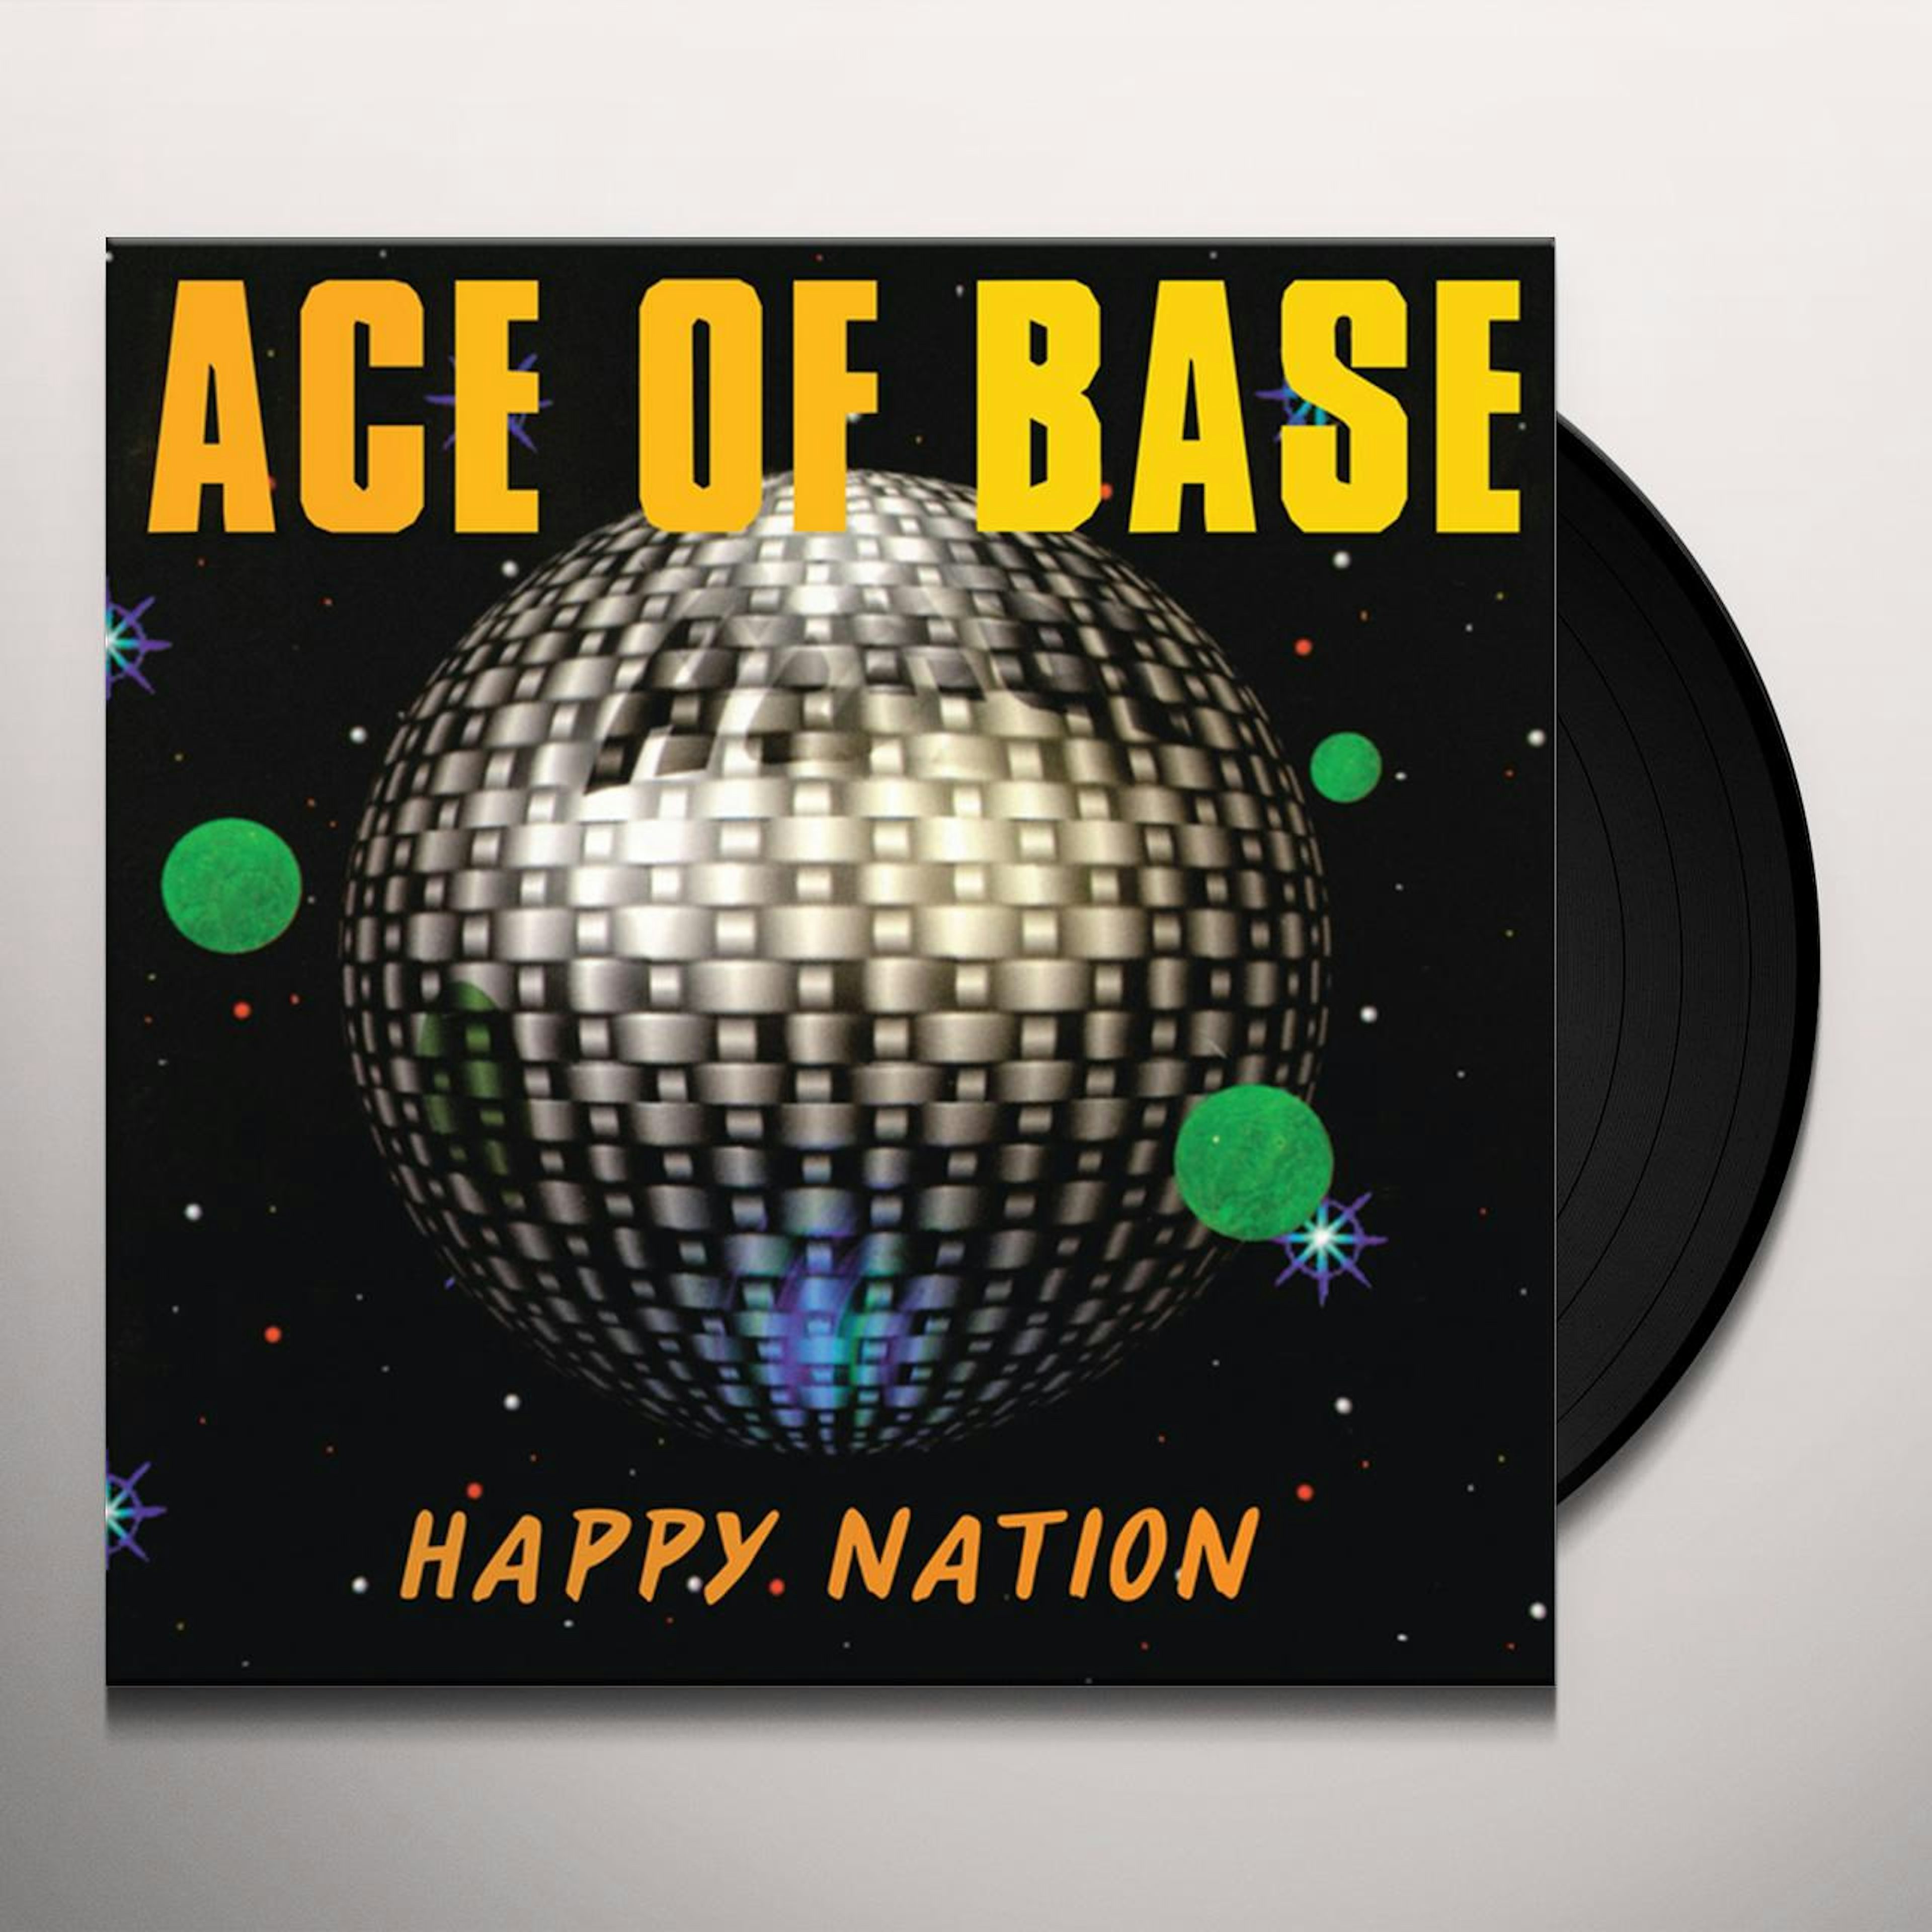 Хэппи нейшен. Ace of Base Happy Nation. Хэппи нейшен ремикс. Happy Nation Ace of Base год выпуска. Fred mykos happy nation